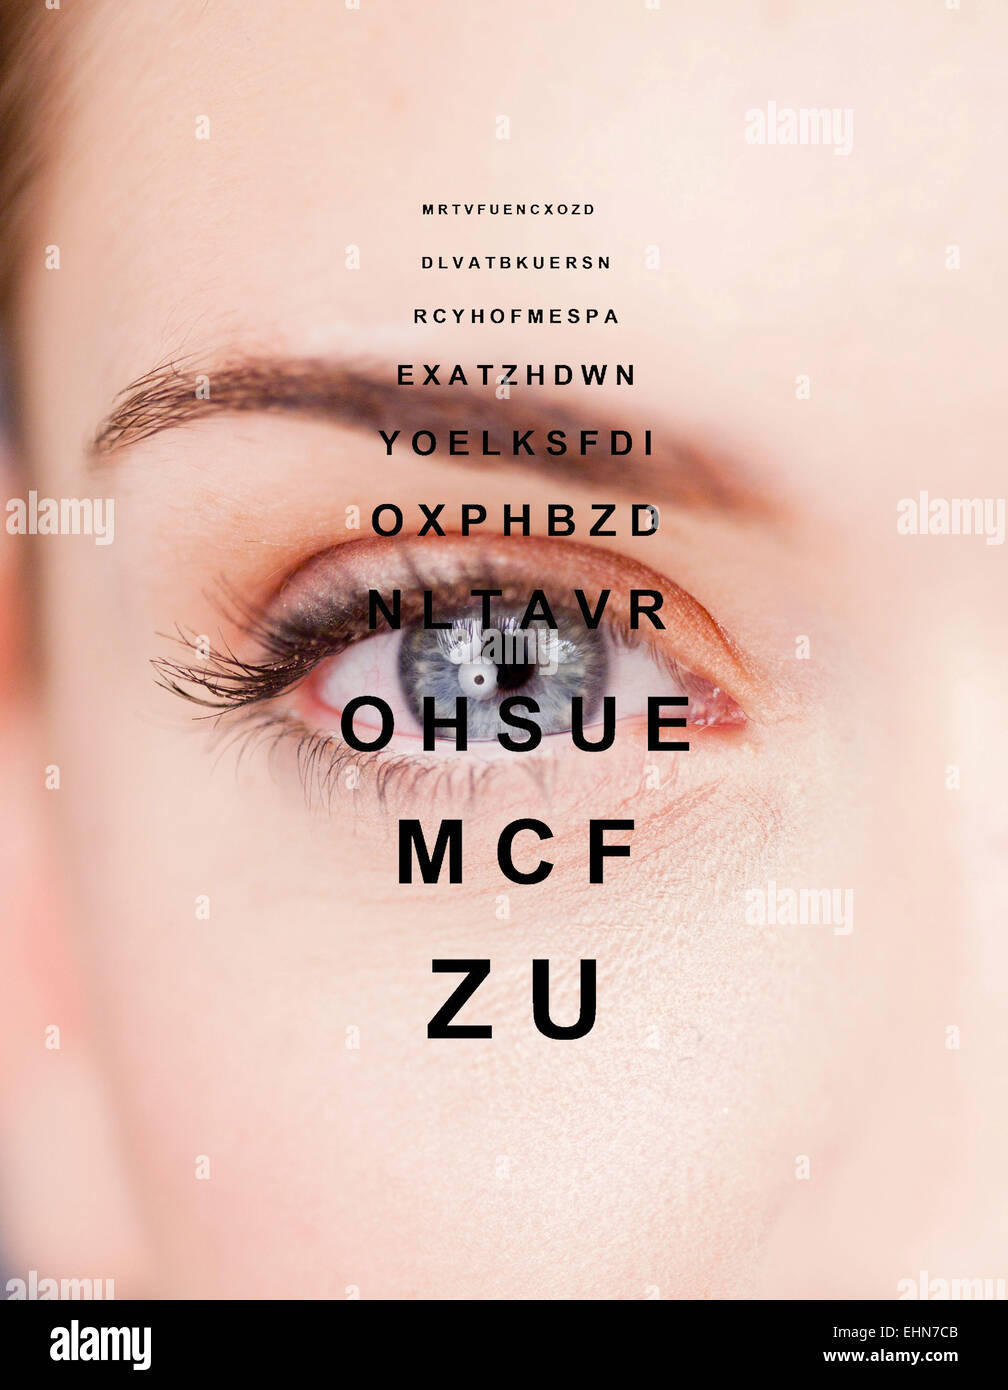 Composite image of a female eye and a typical chart used in eye examinations. Stock Photo